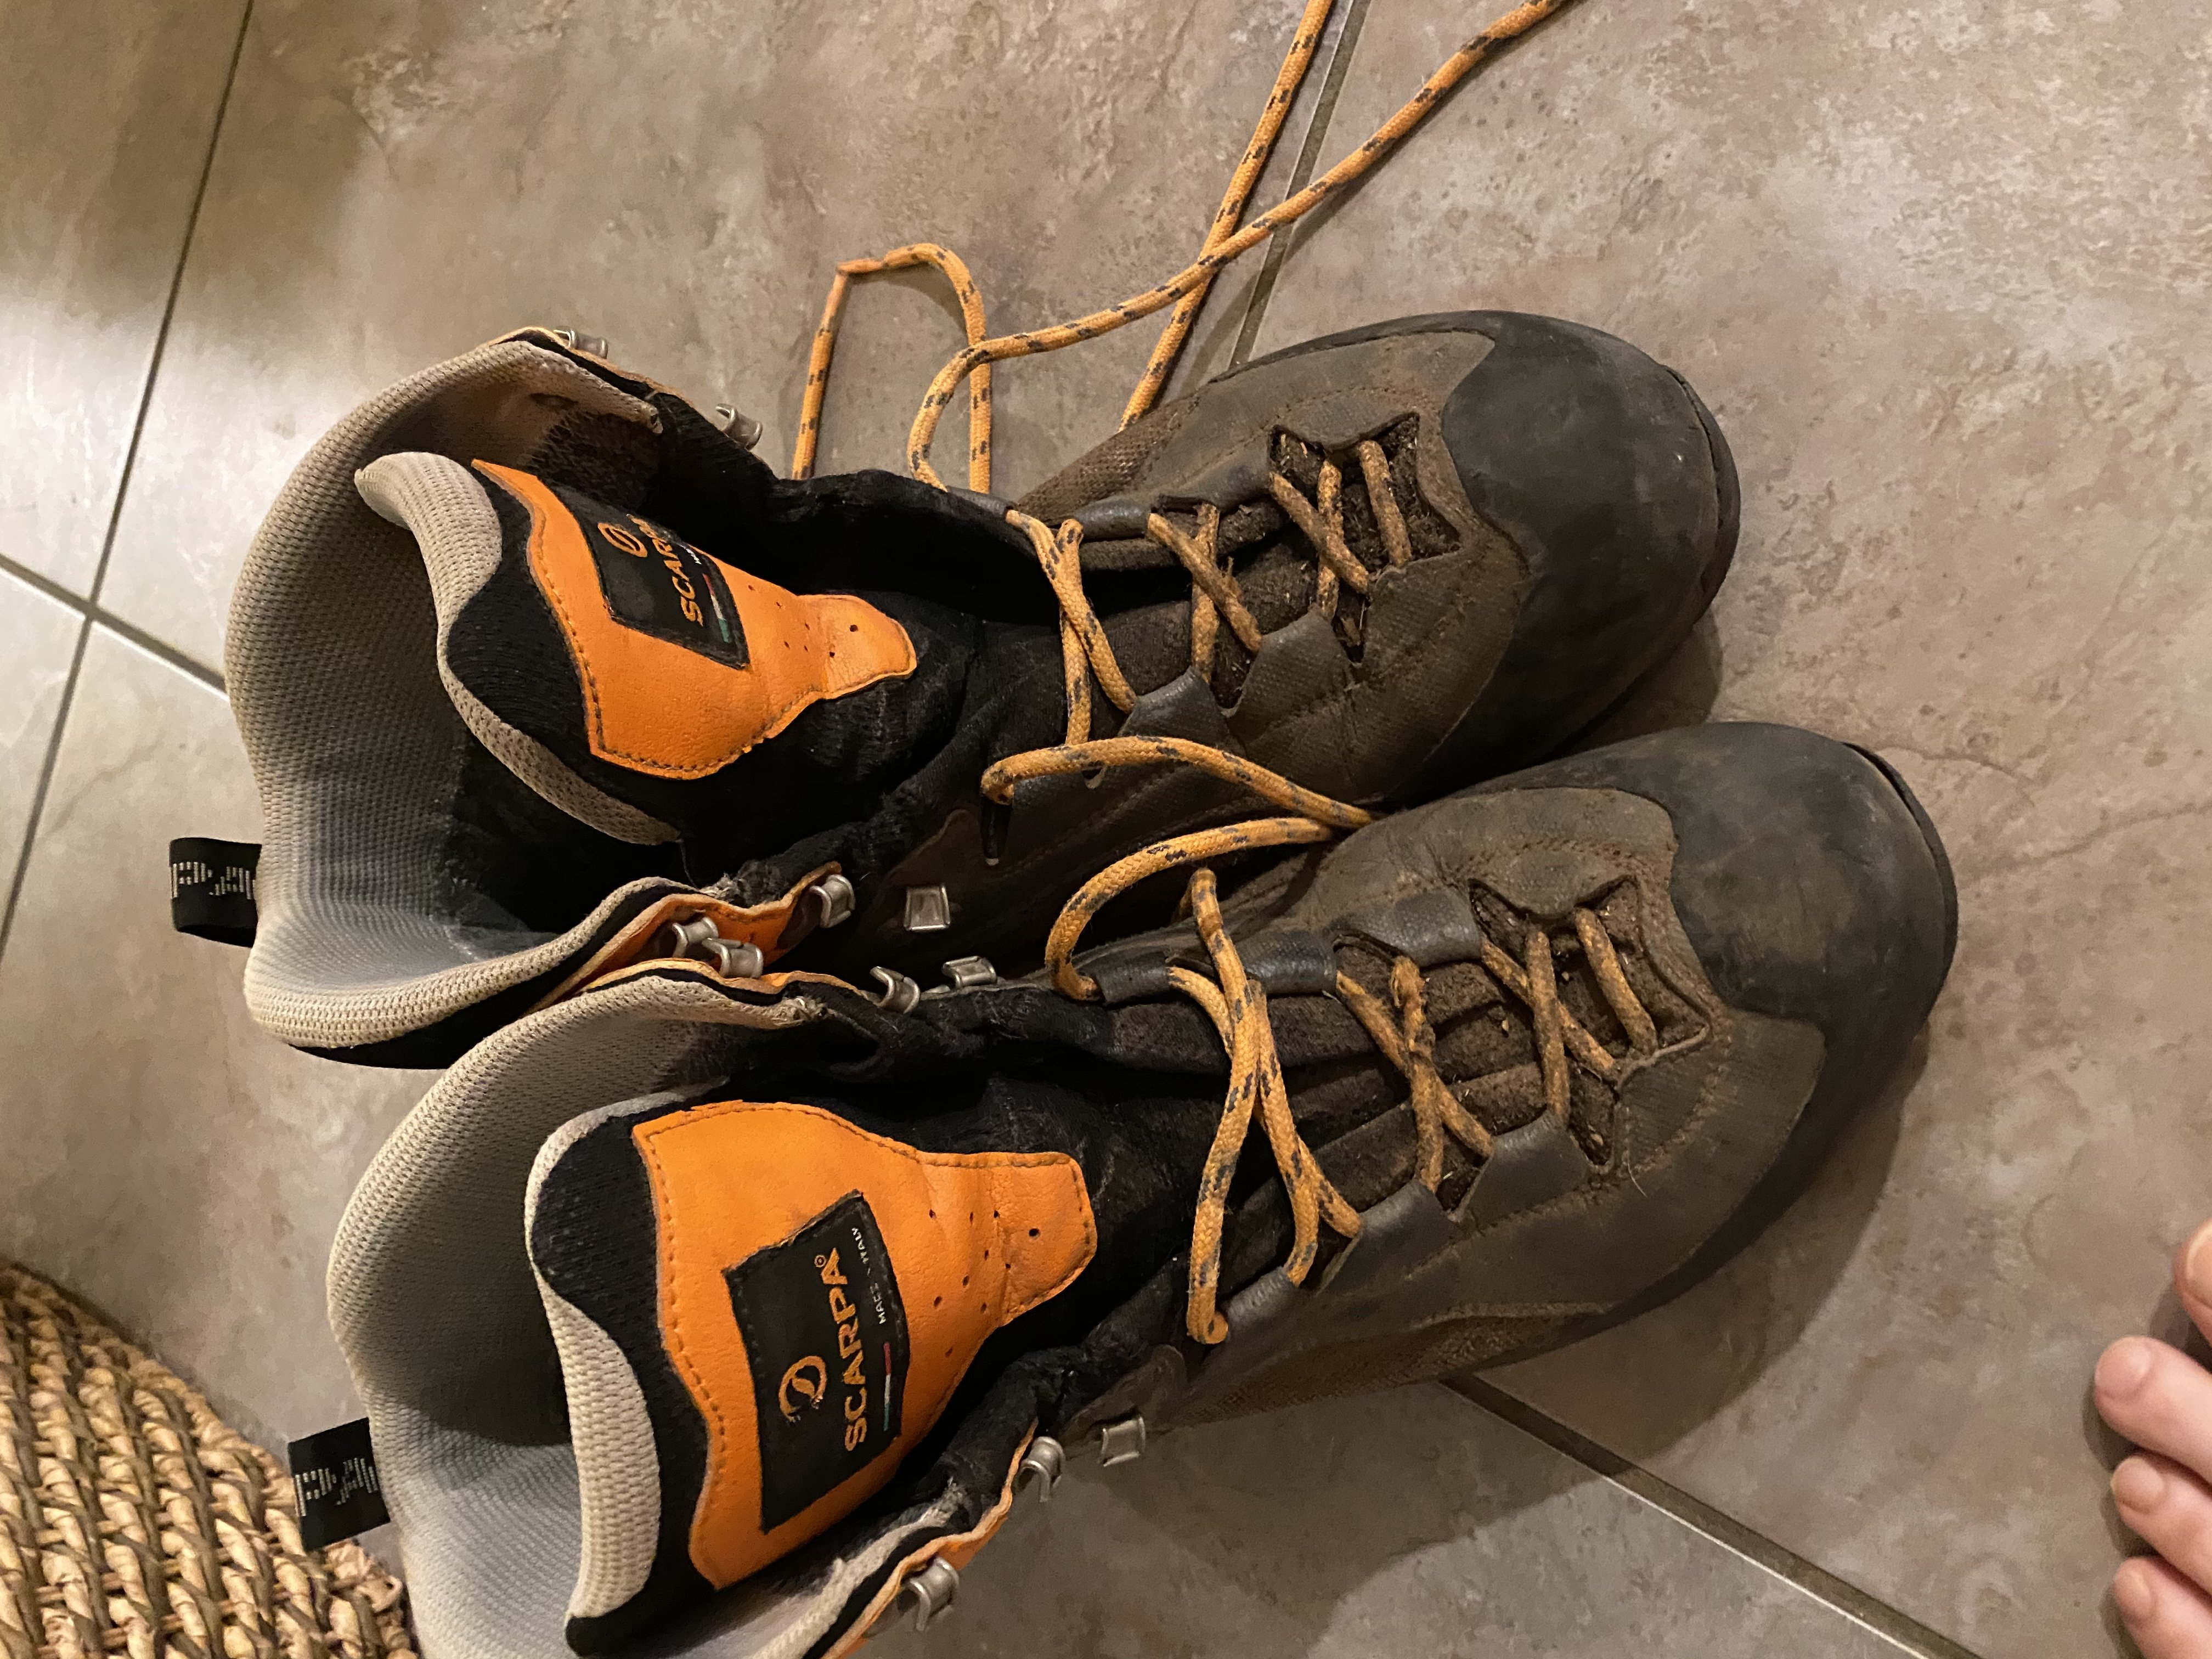 Free used Scarpa boots size 11/ 11.5 - Classified Ads - CouesWhitetail ...